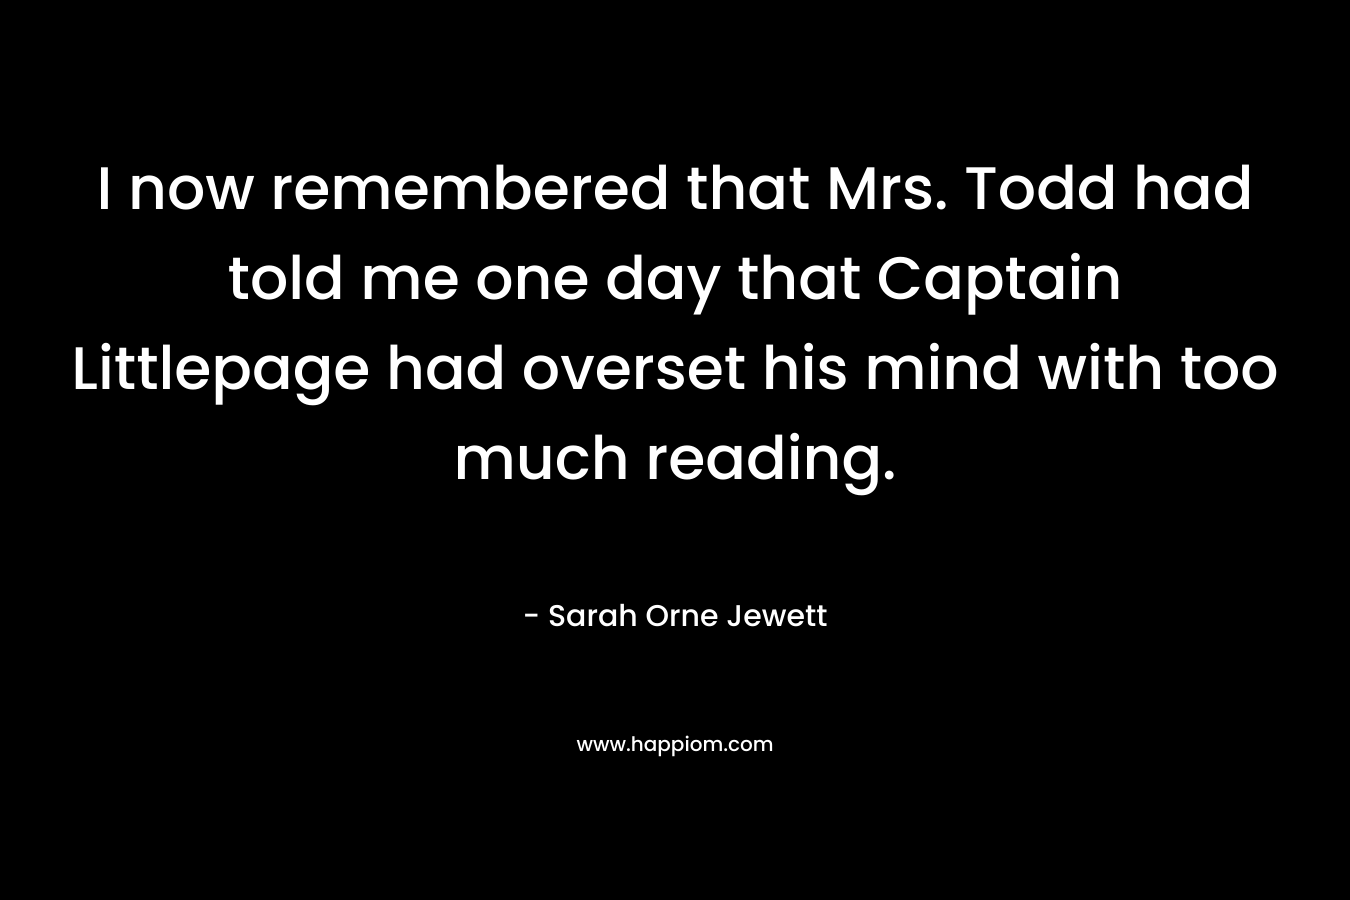 I now remembered that Mrs. Todd had told me one day that Captain Littlepage had overset his mind with too much reading. – Sarah Orne Jewett